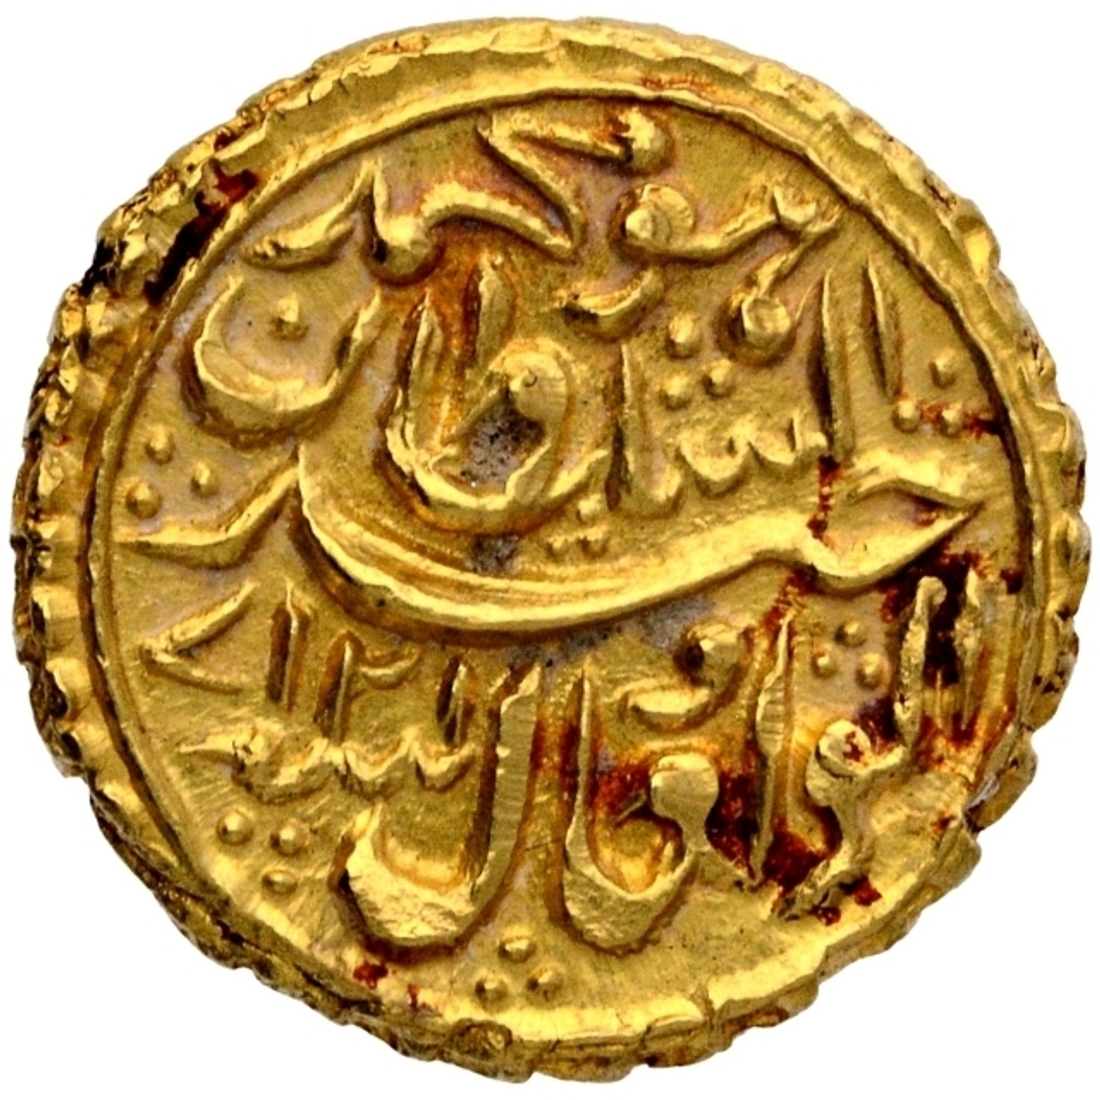 Gold Pagoda Coin of Tipu Sultan of Khurshed Sawad Mint of Mysore Kingdom.